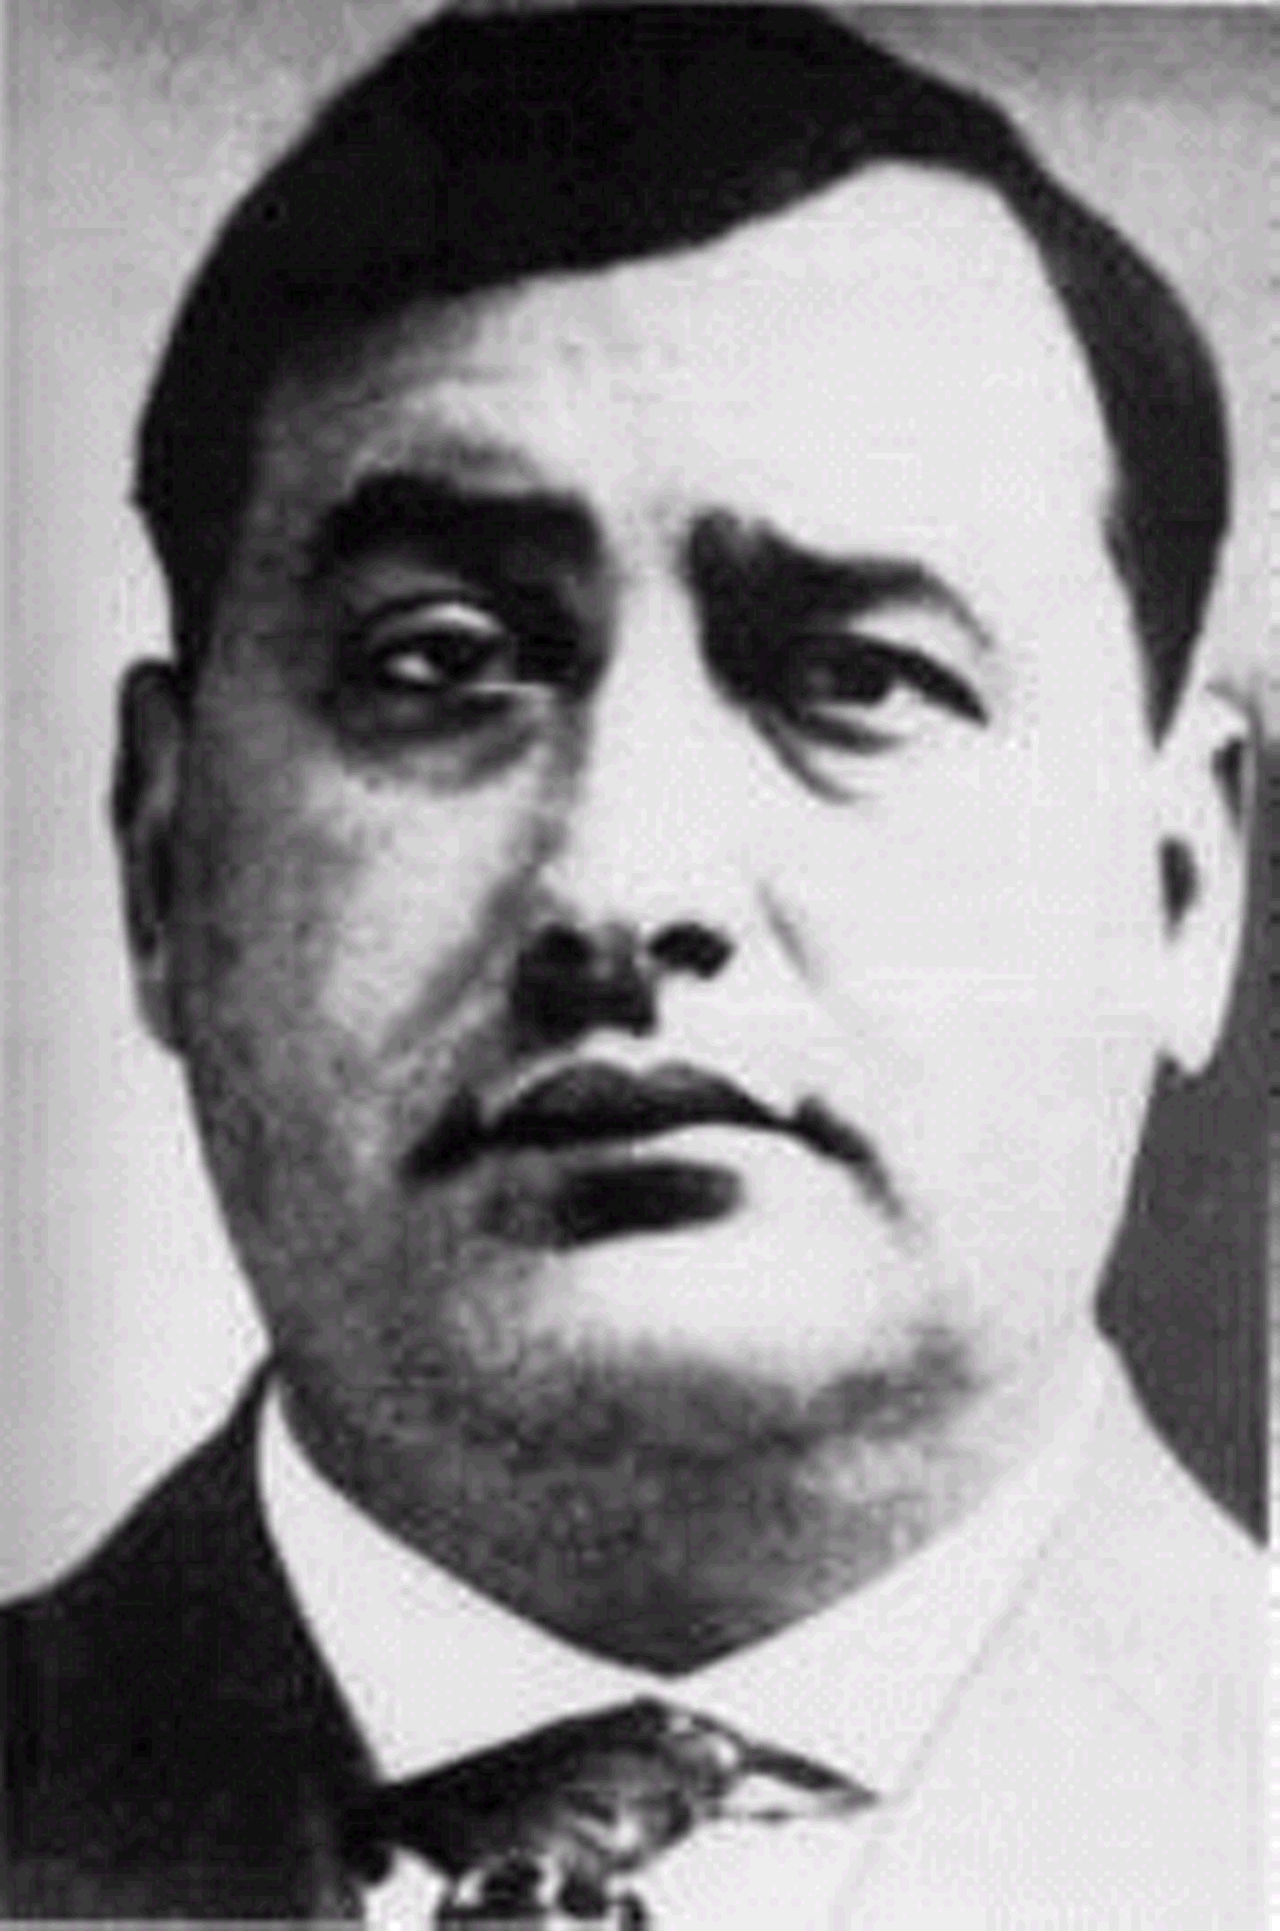 Joseph "Big Joe" Lonardo
(1920-1927) - Joseph Lonardo, a native of Sicily, was first thought to be in the States at the turn of century. Documents support this fact of his arrival. When Prohibition really took effect in 1920, Joe Lonardo didn't move directly into bootlegging and focused on corn sugar. The commodity was a needed material in producing the illegal beverage.
In the spring of 1927 Lonardo set sail for his homeland. He left much of the operations to Salvatore Todaro. What Lonardo and his faithful soldiers didn't know was the Todaro had formed an alliance with other groups. Upon his return Lonardo was gunned down on October 13, 1927 in a local Cleveland barbershop. His faithful brother John wasn't spared either and their murders sparked the Corn Sugar Wars.